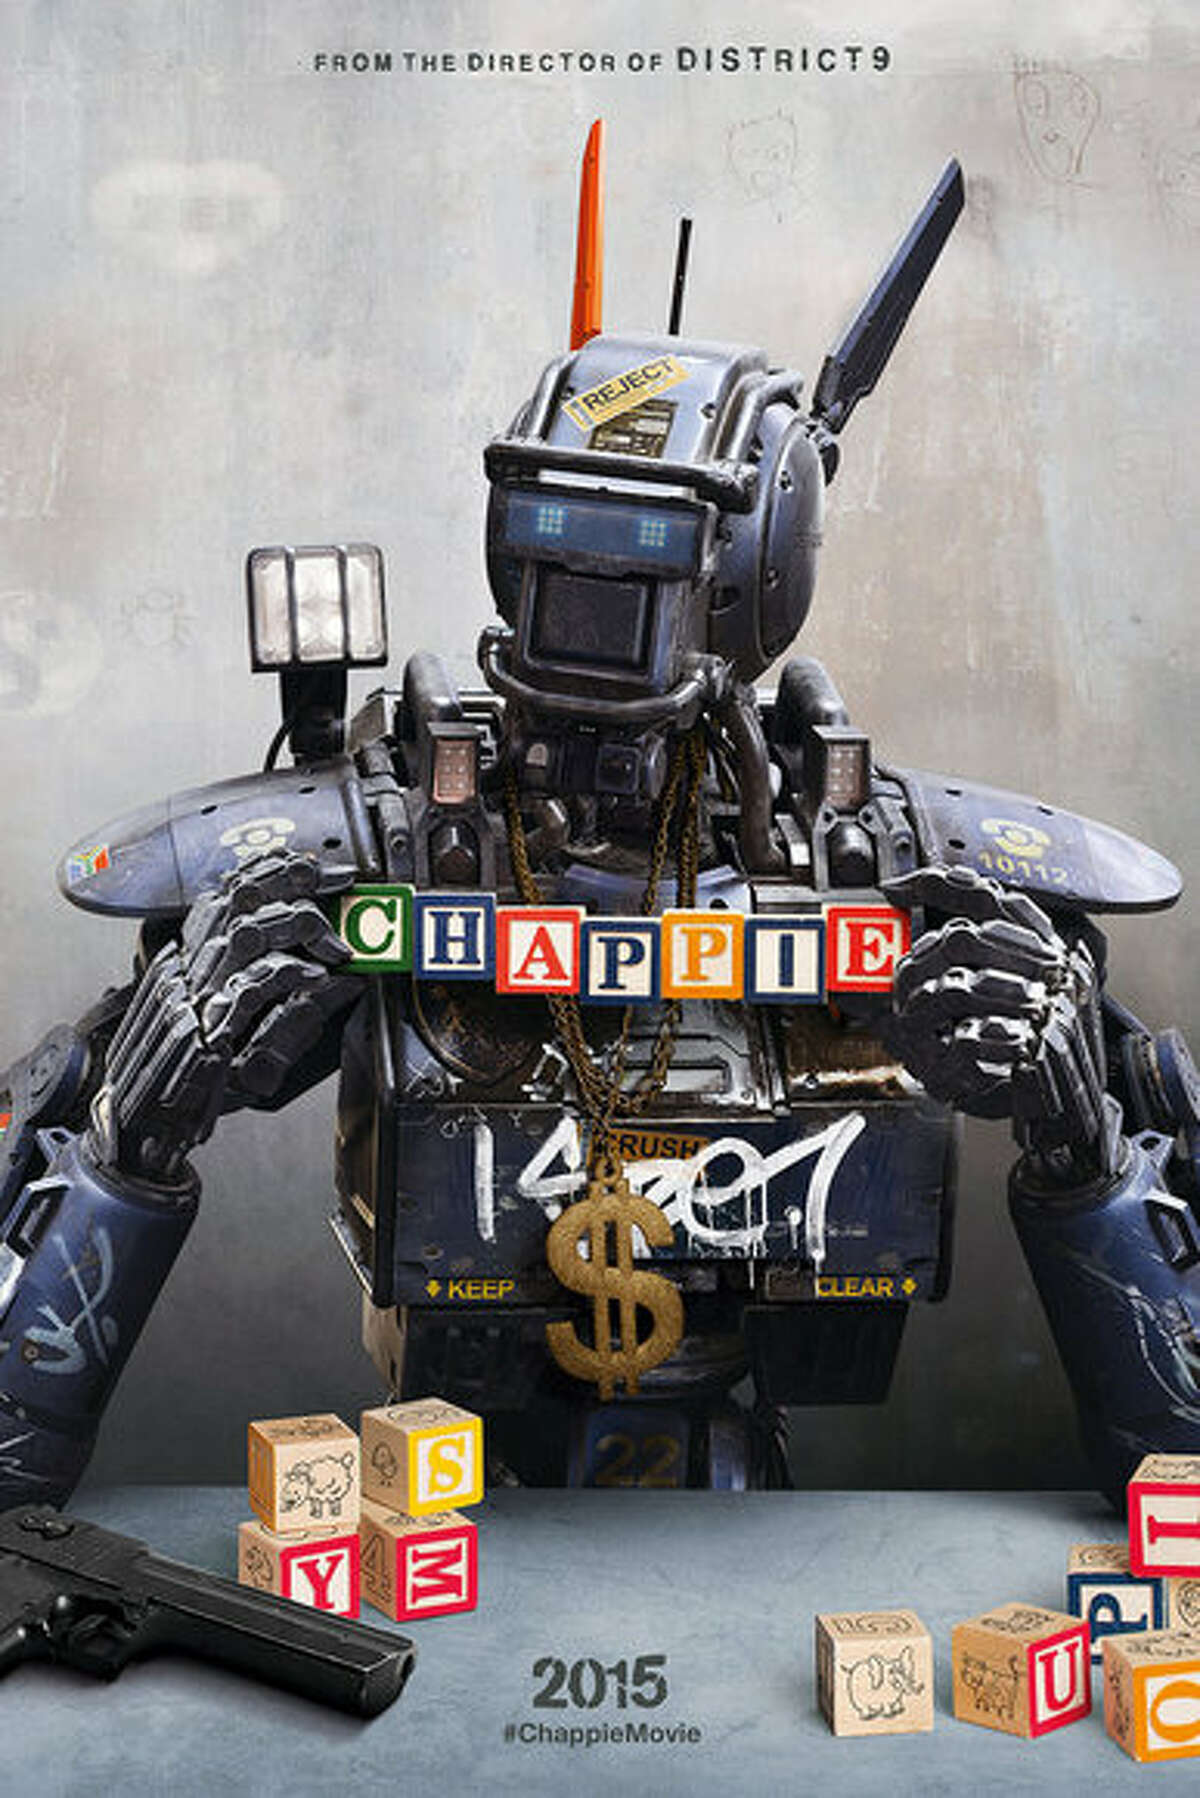 “Chappie”Release date: March 6Starring: Hugh Jackman, Sharlto CopleyFrom the first few seconds of the film’s reveal trailer, it was clear that this was going to be a return to form for the “District 9” director. Sharlto Copley will play the already loveable robot, who shares several similarities with Johnny 5 from “Short Circuit.”